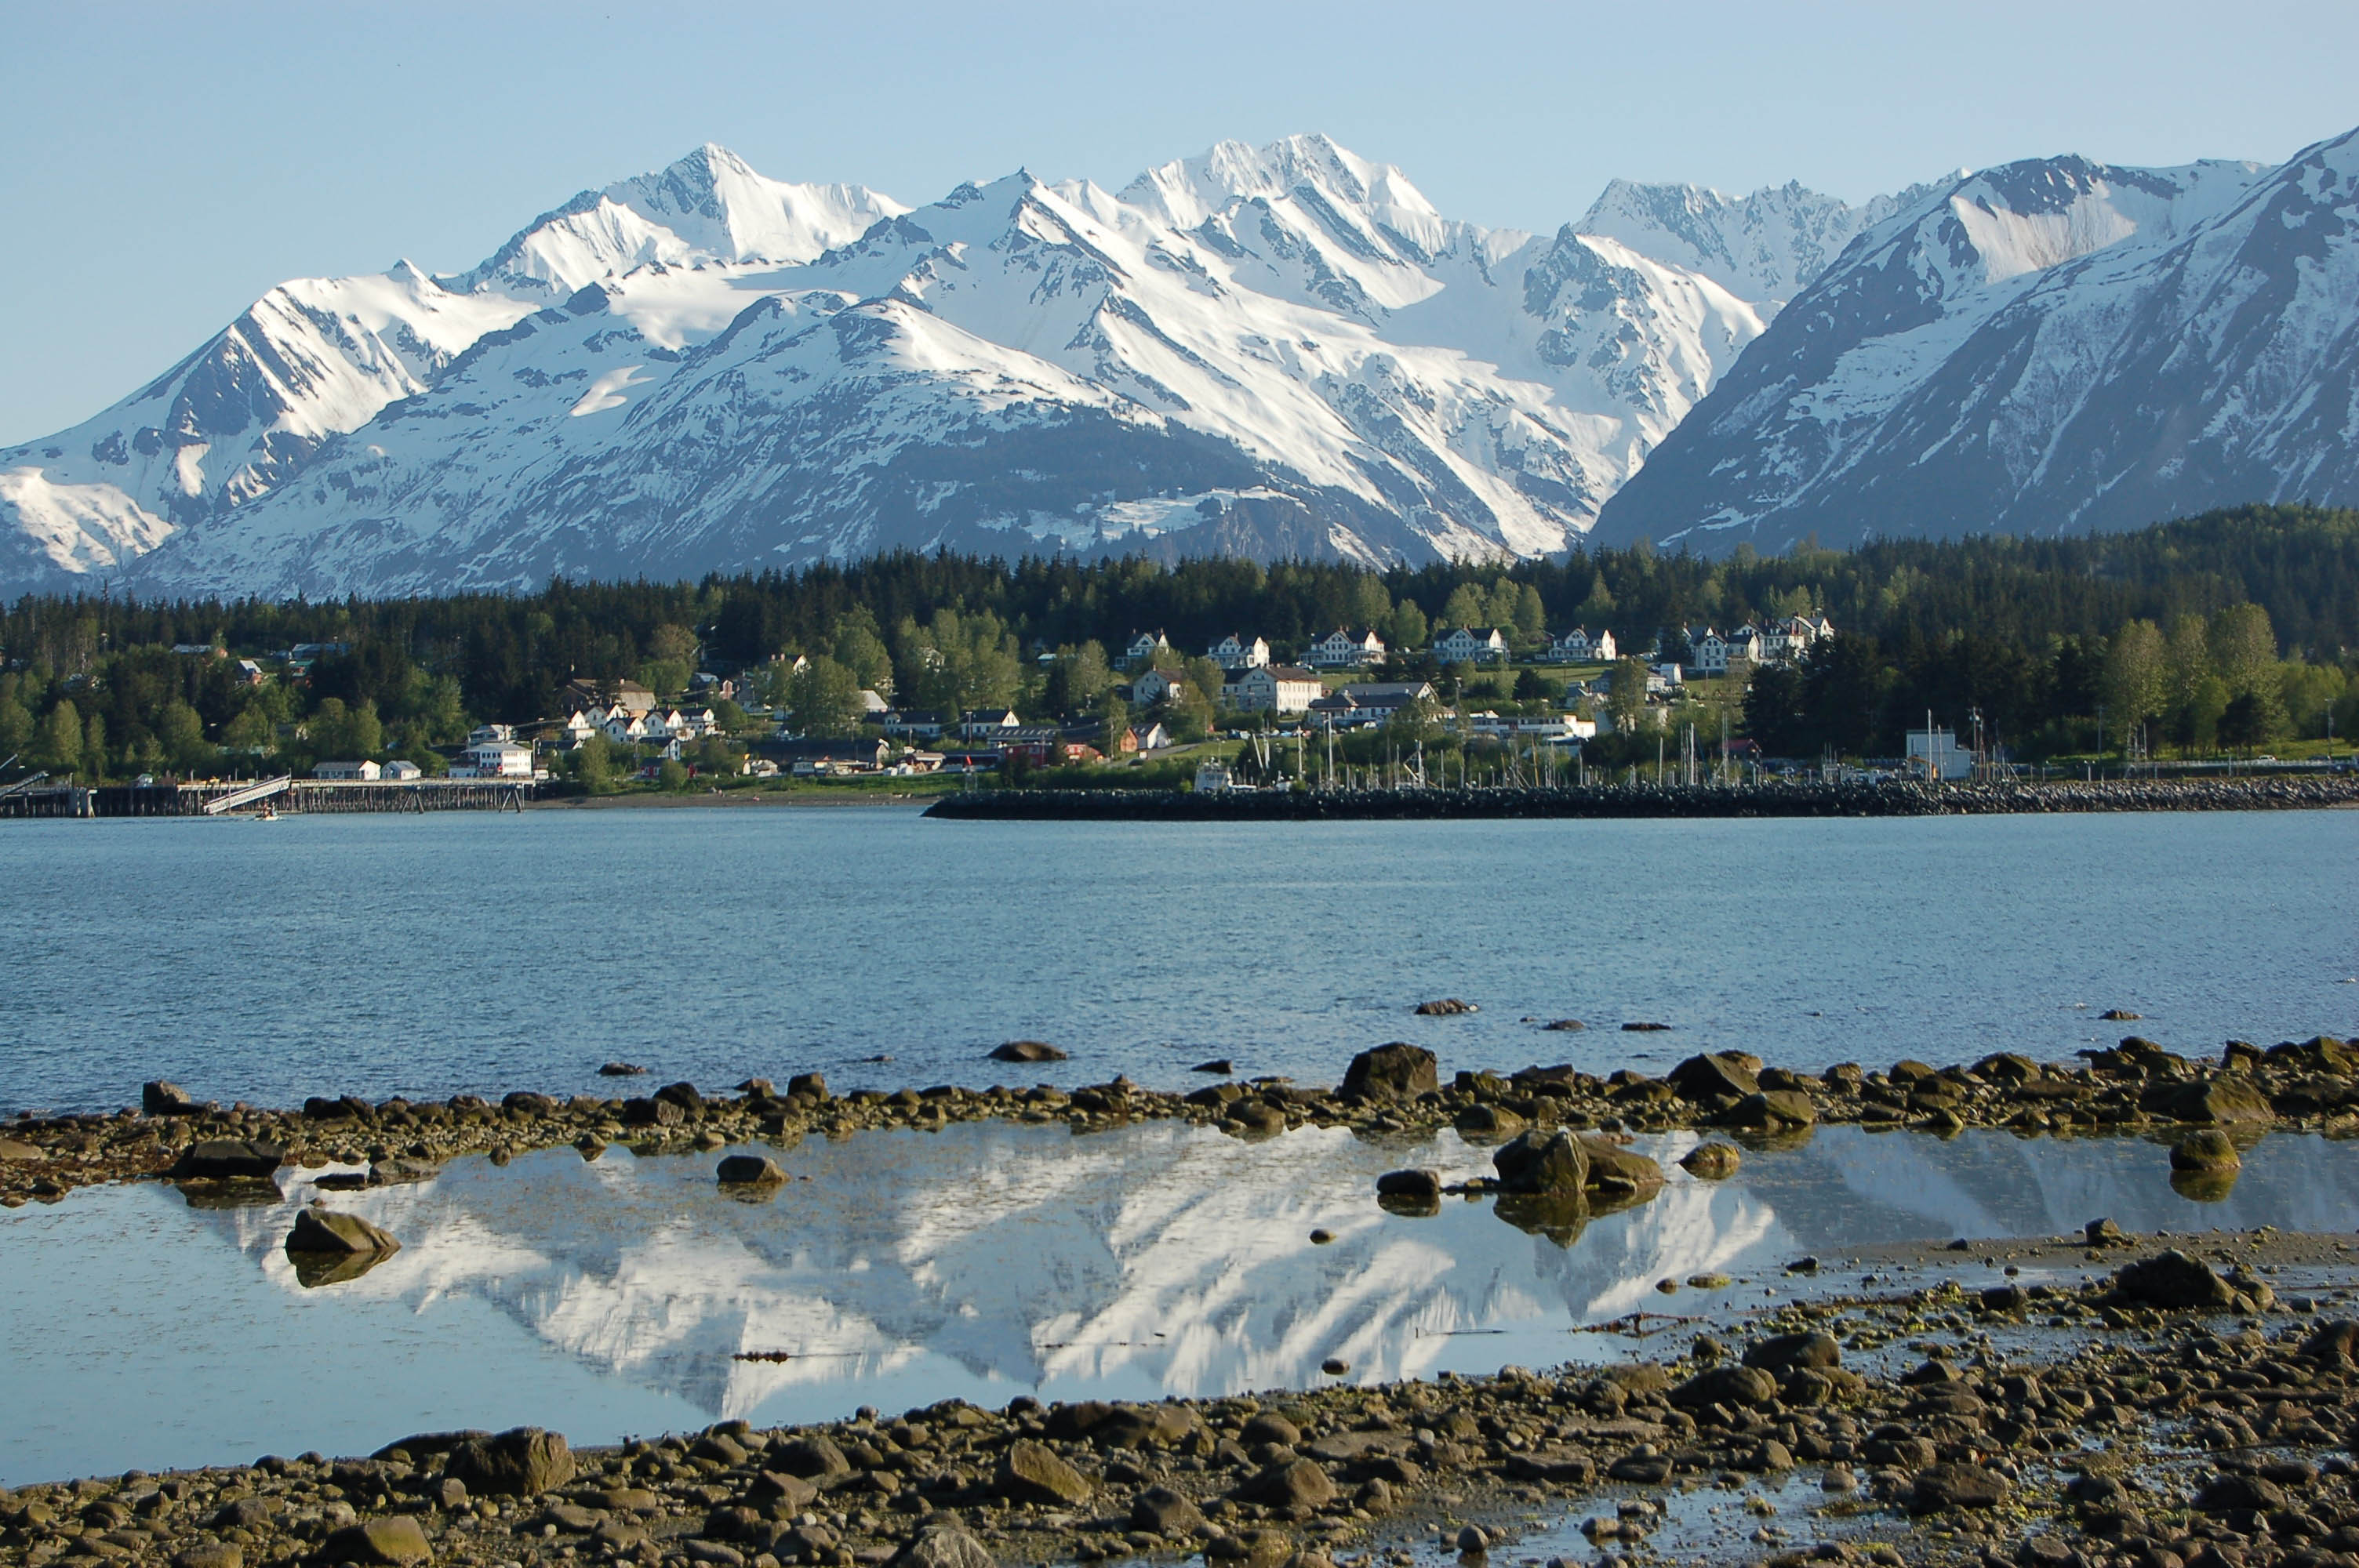 Ft. Seward with the Chilkat Mountains in the background